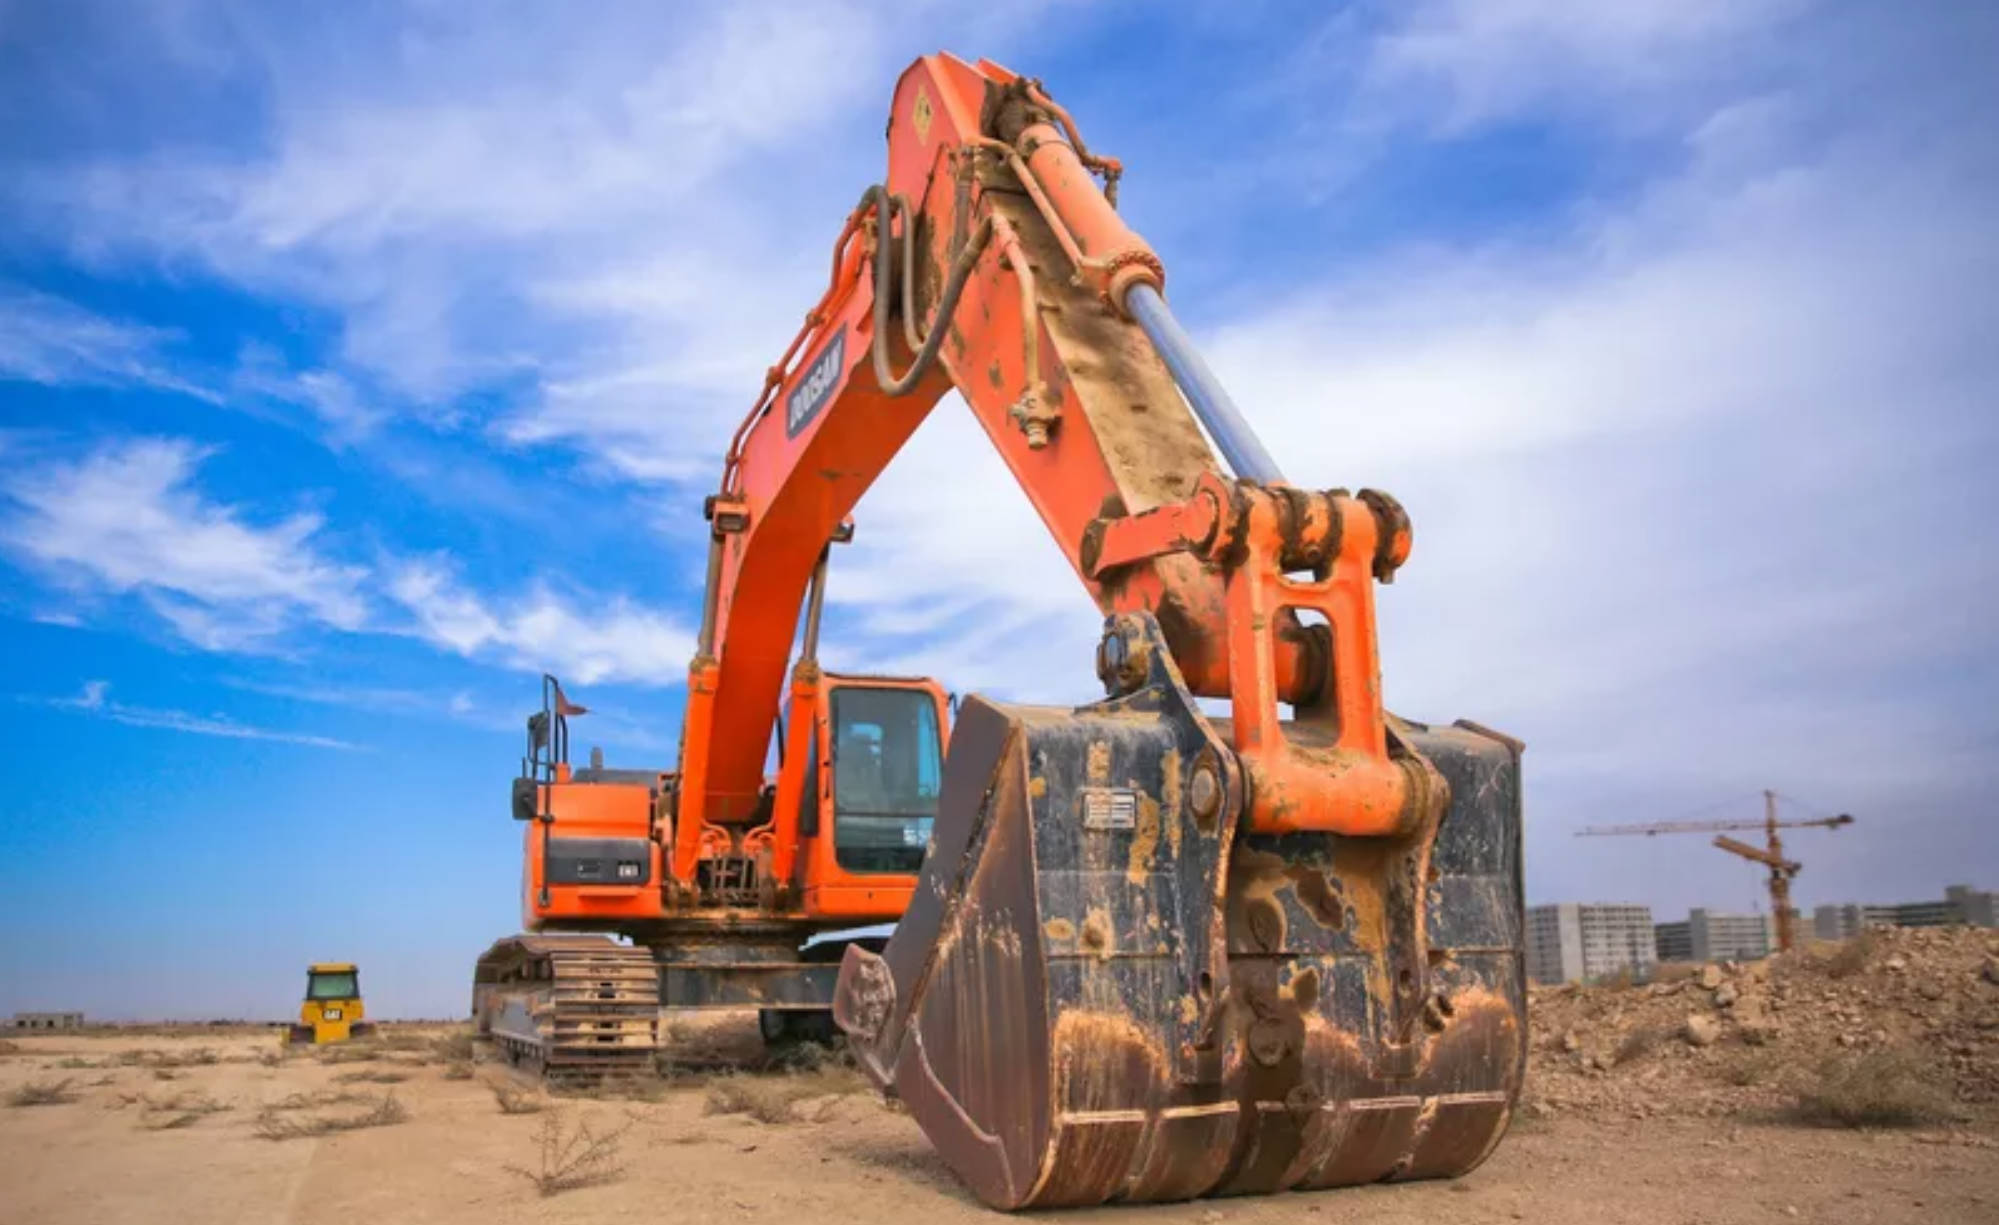 A List Of Excavator Models. How Do You Go About Categorizing Them?